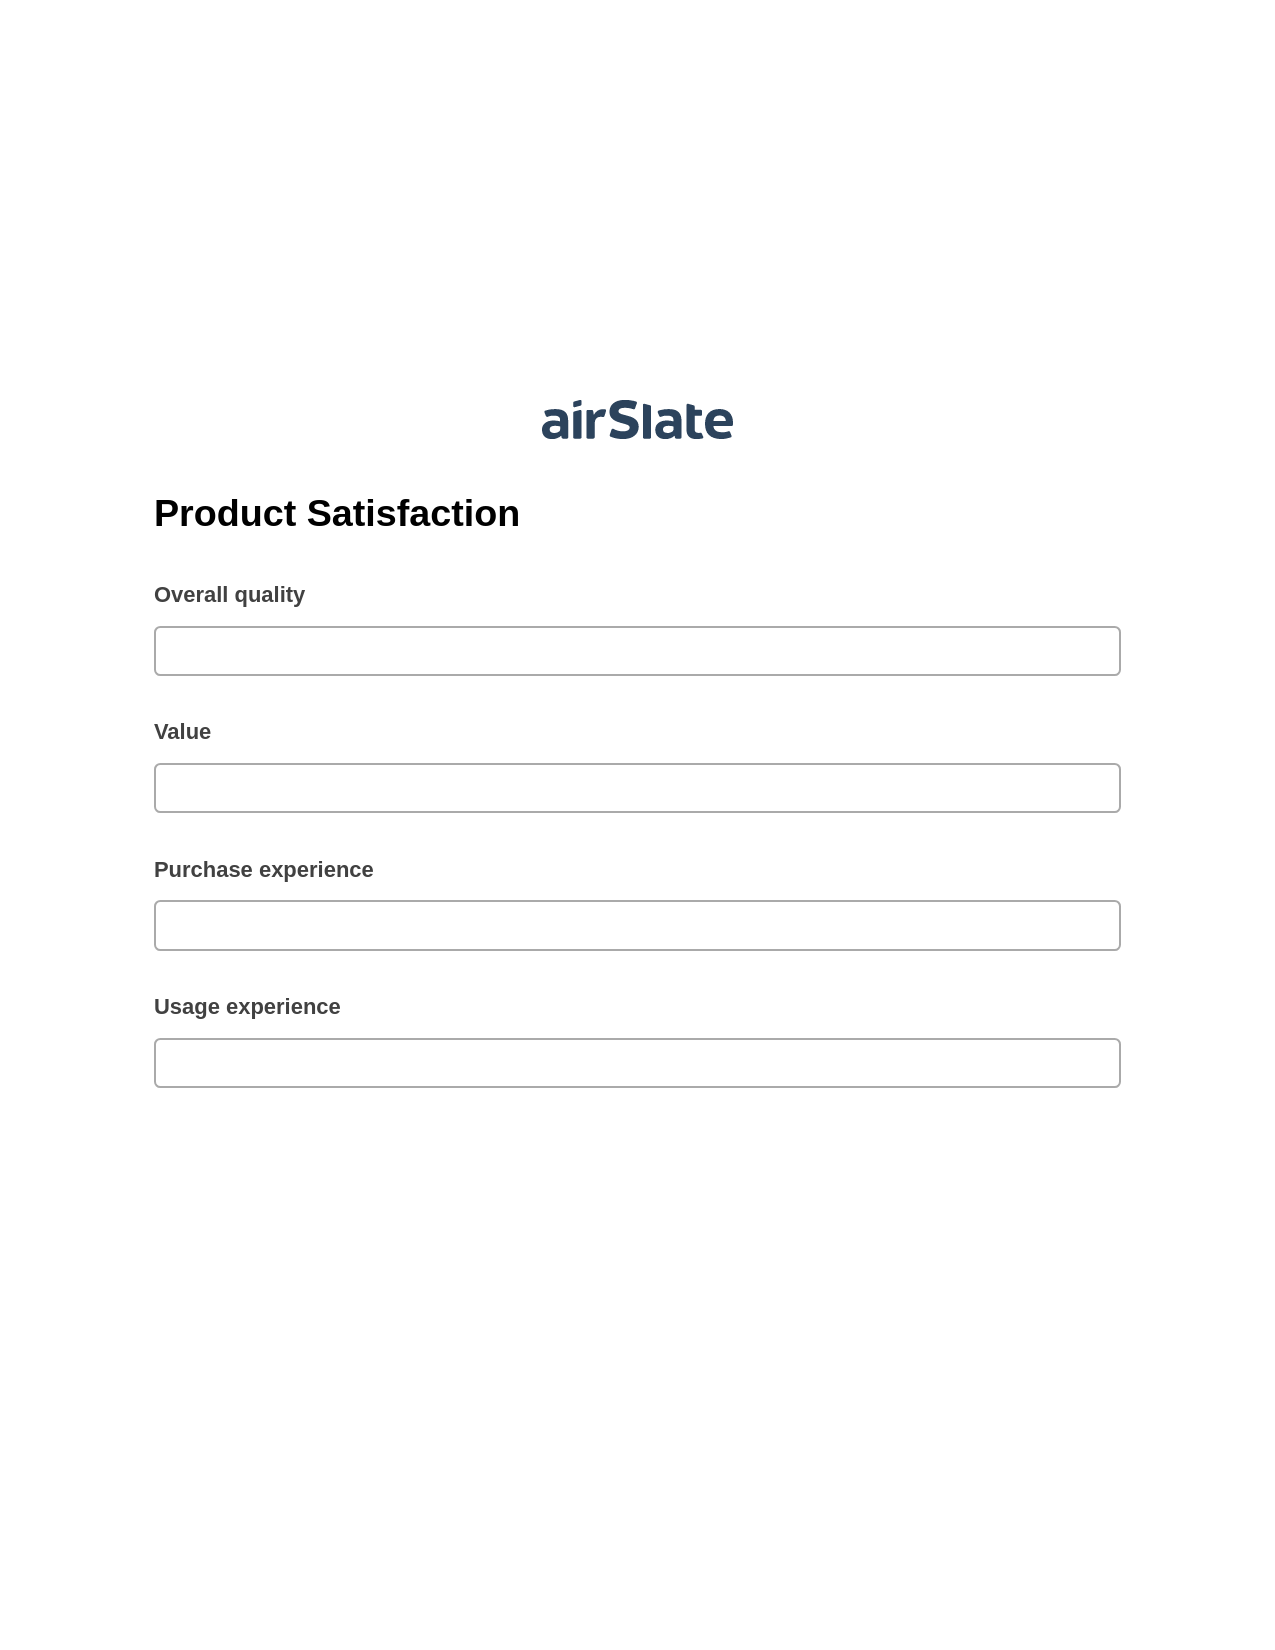 Product Satisfaction Pre-fill from Google Sheets Bot, Revoke Access Bot, OneDrive Bot